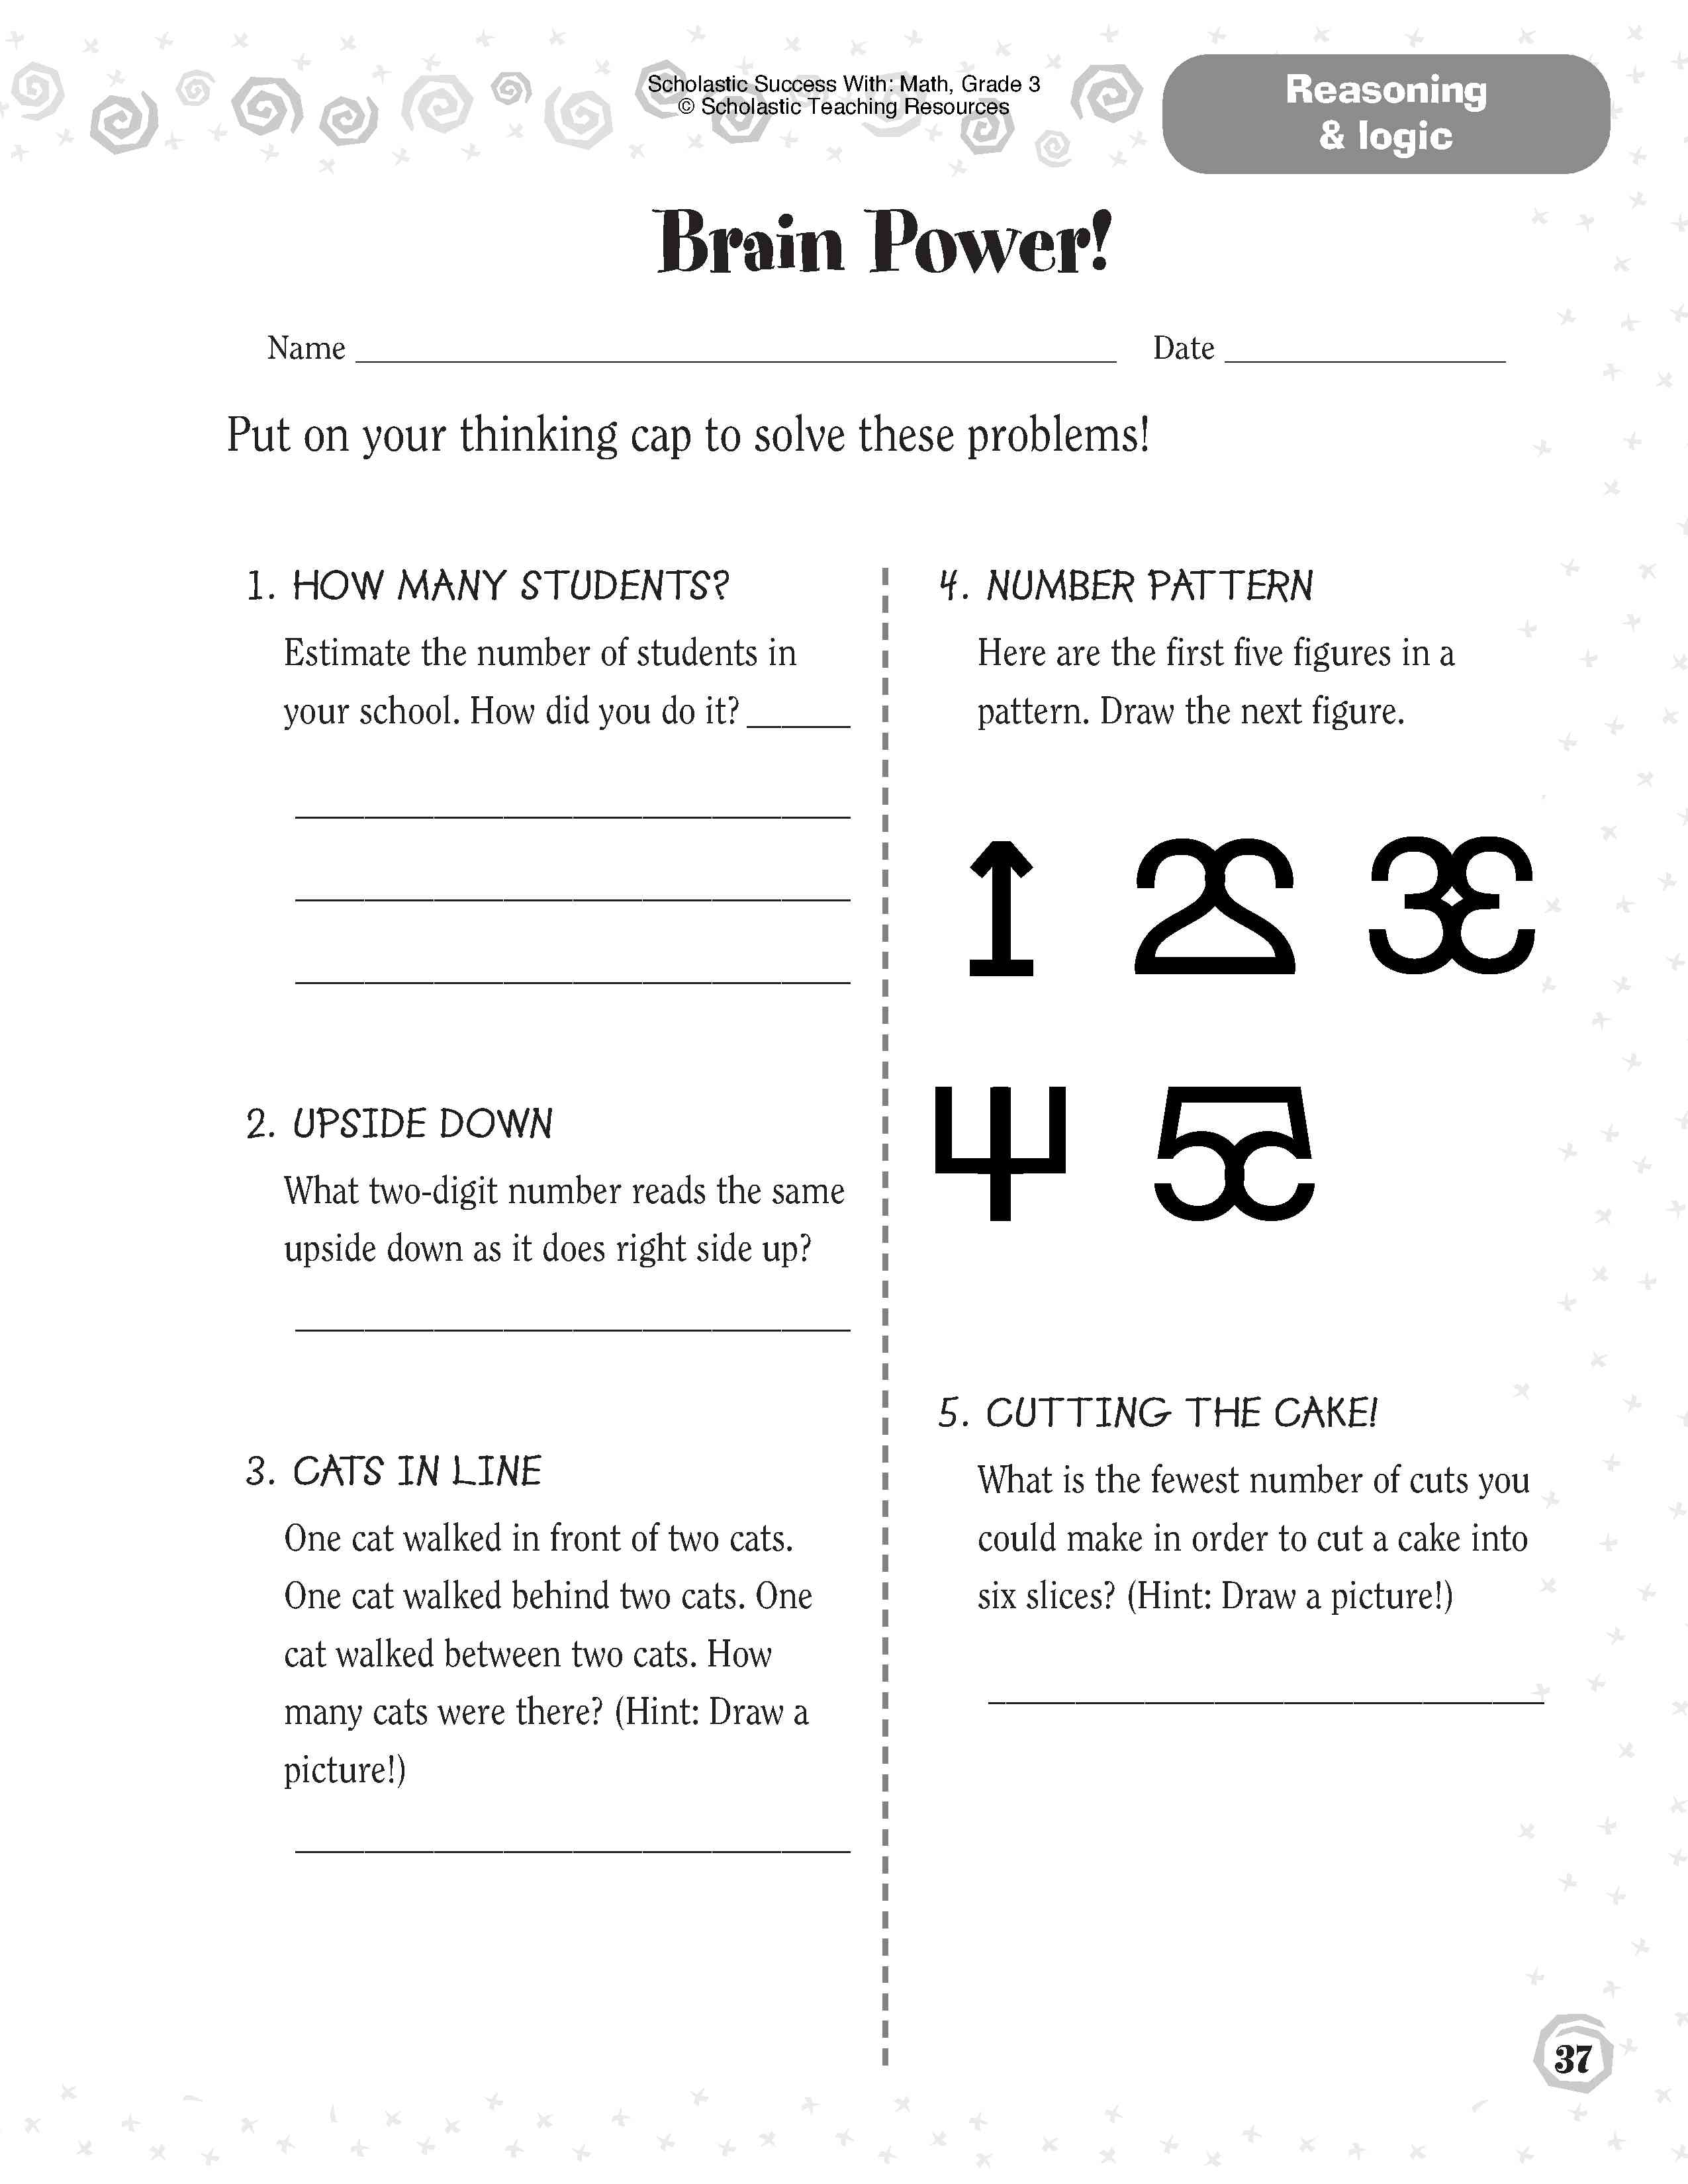 critical thinking questions worksheet